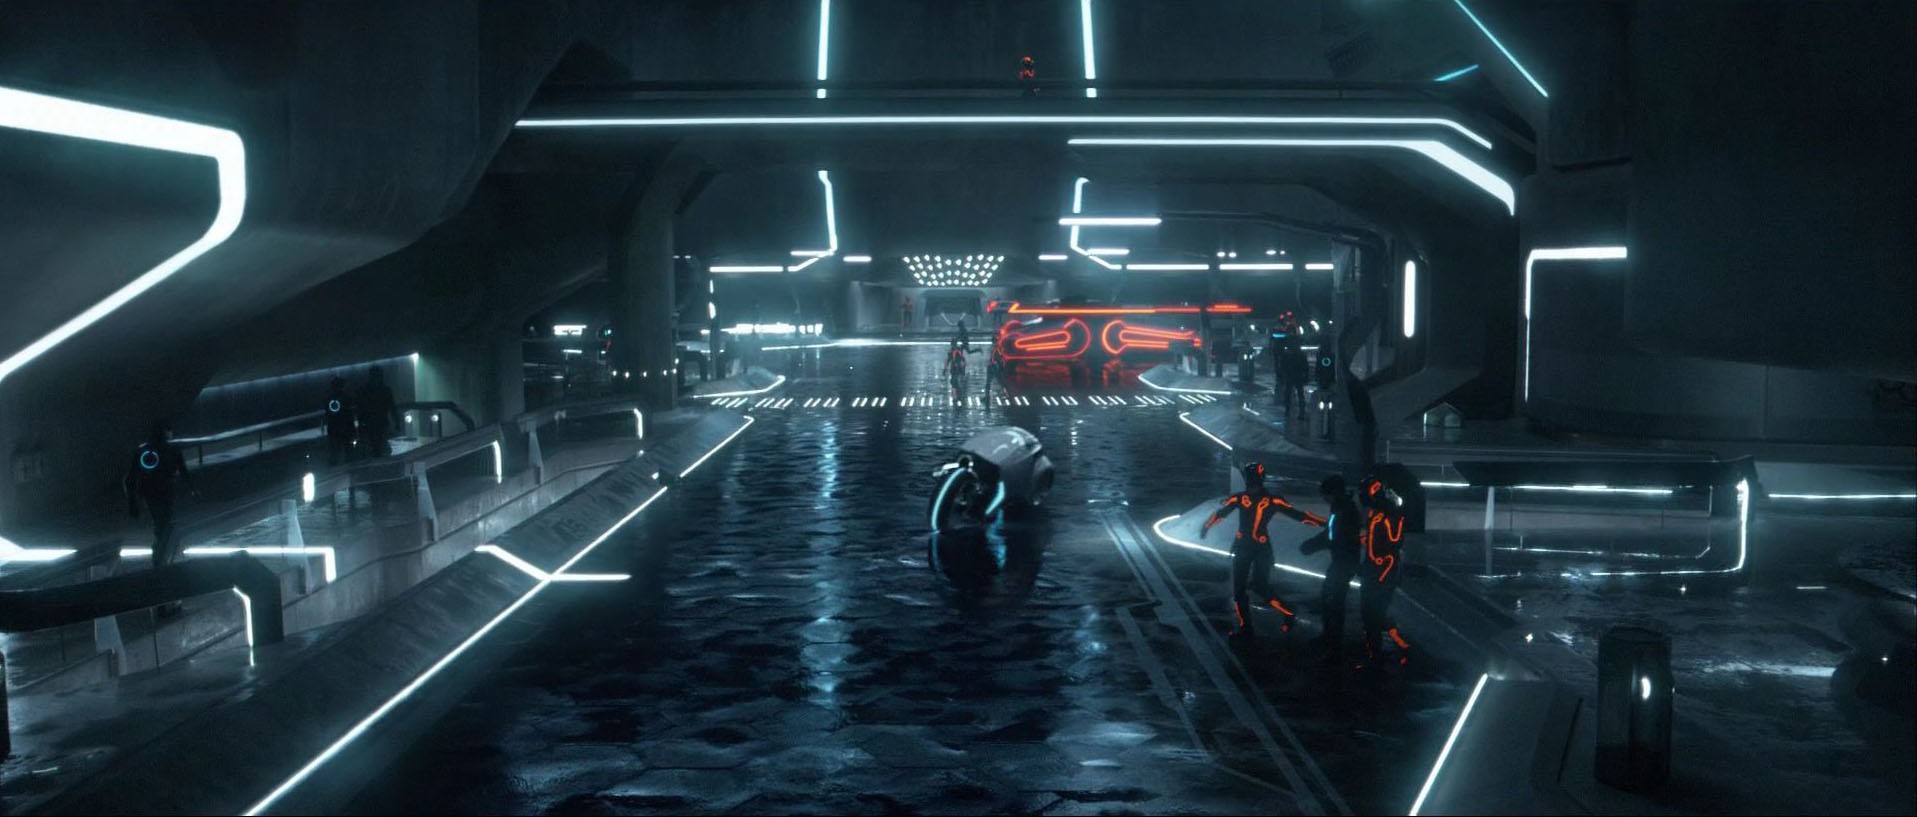 General 1917x817 movies CGI Tron: Legacy neon science fiction